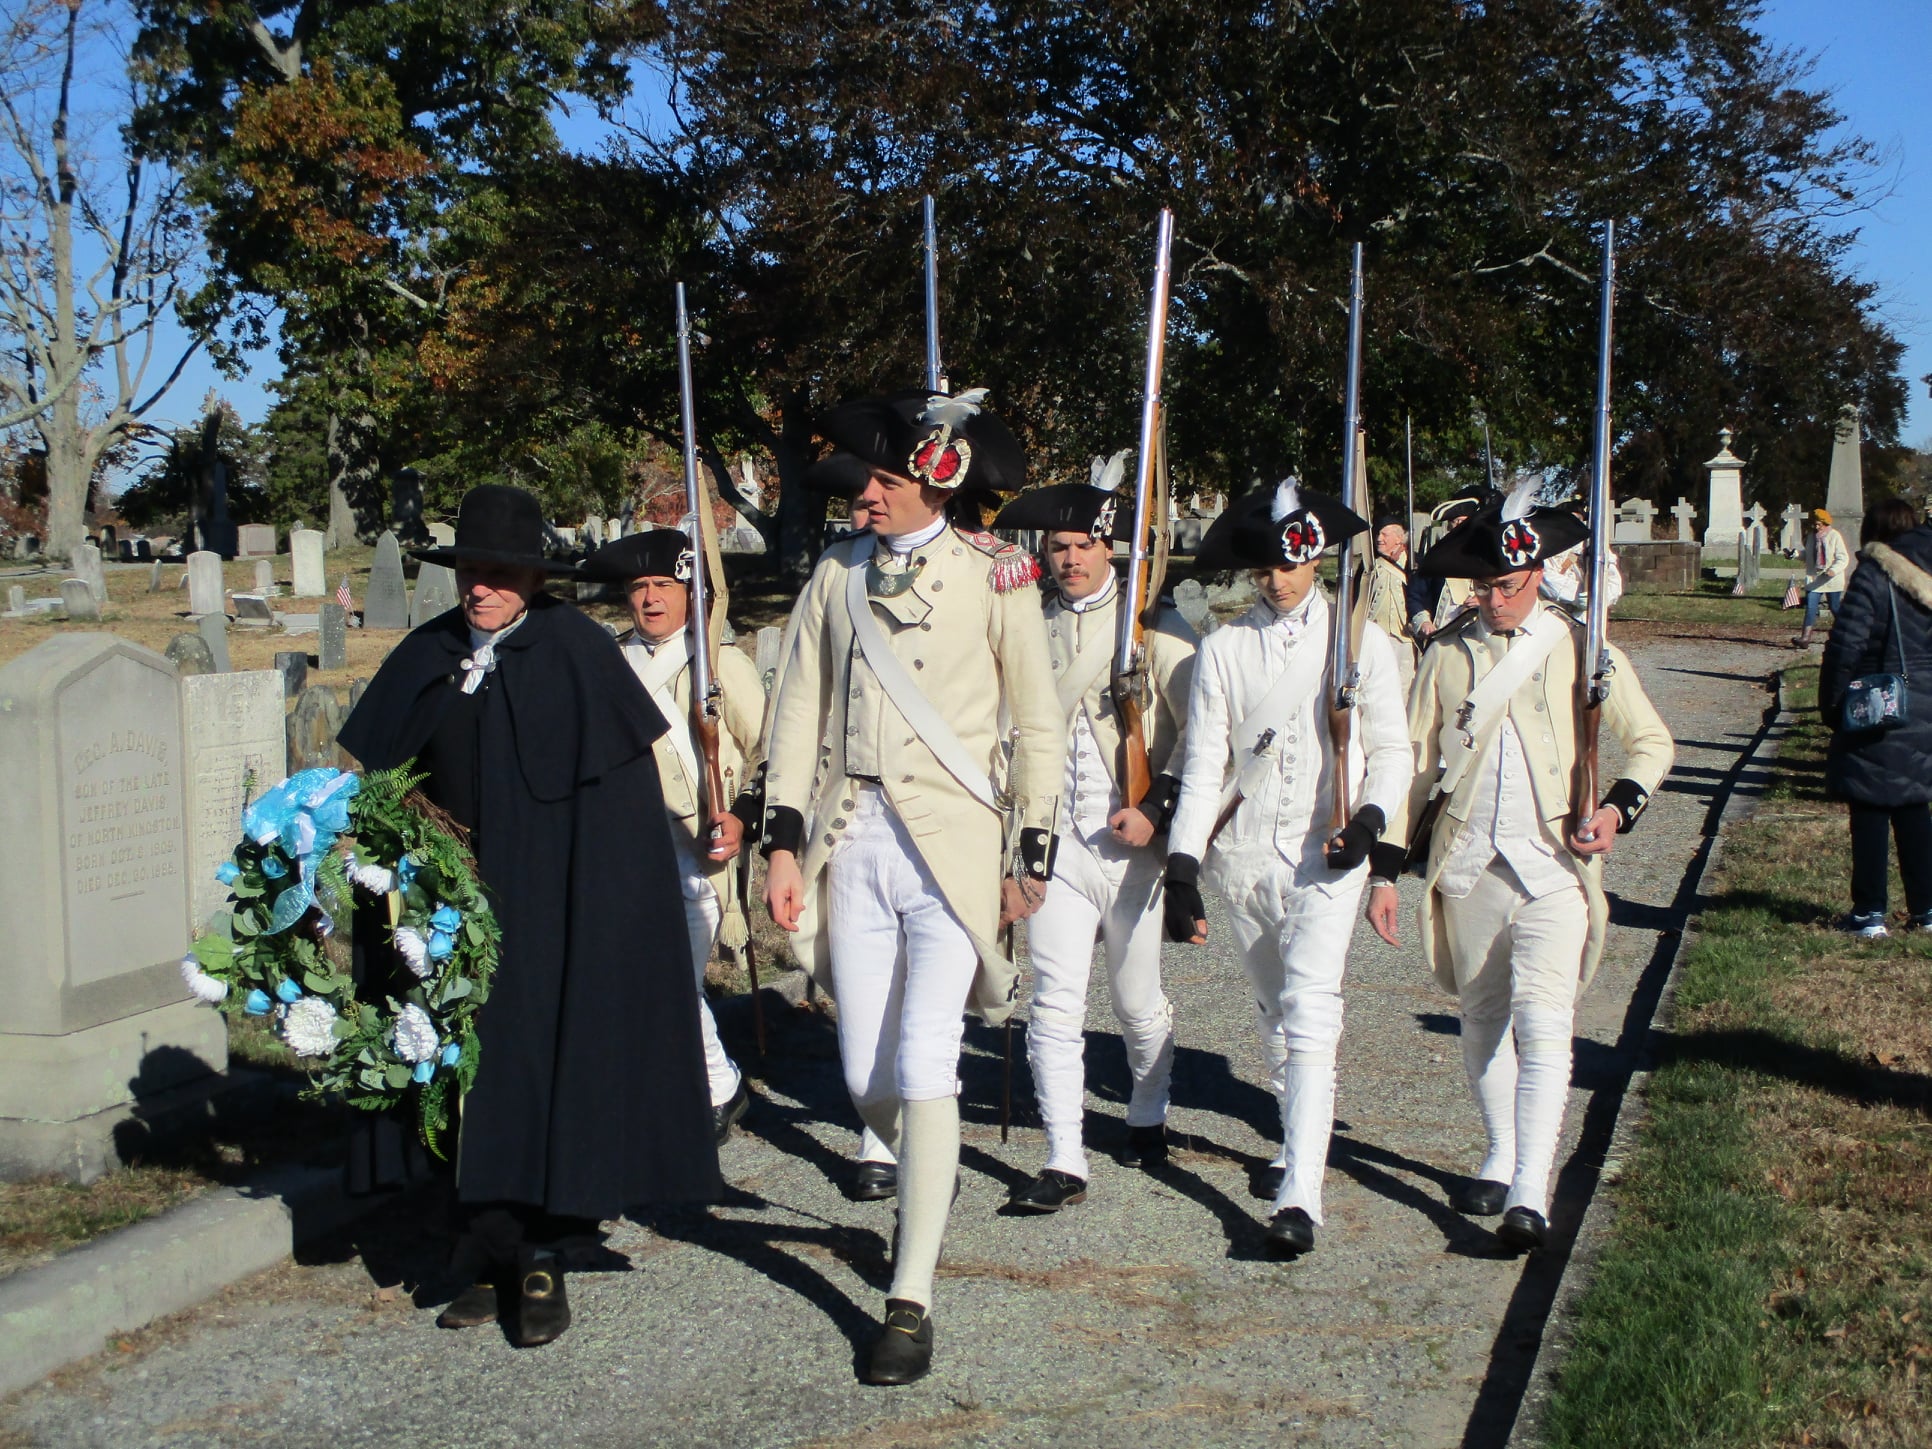 2.French Soldiers, Providence, Rhode Island-November 6, 2021